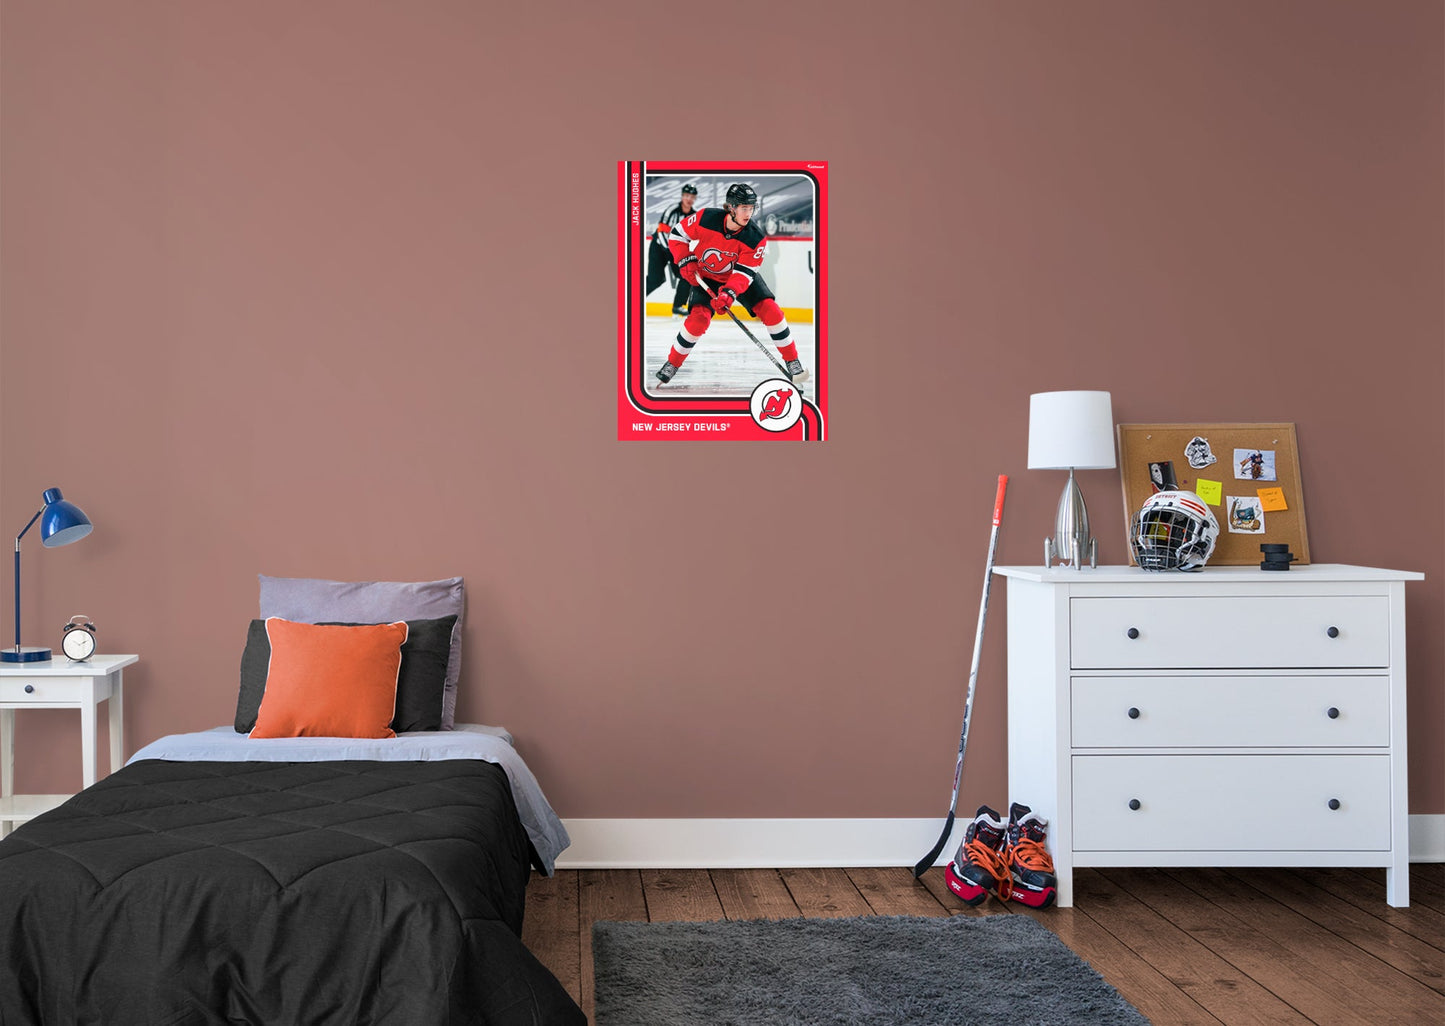 New Jersey Devils: Jack Hughes Poster - Officially Licensed NHL Removable Adhesive Decal